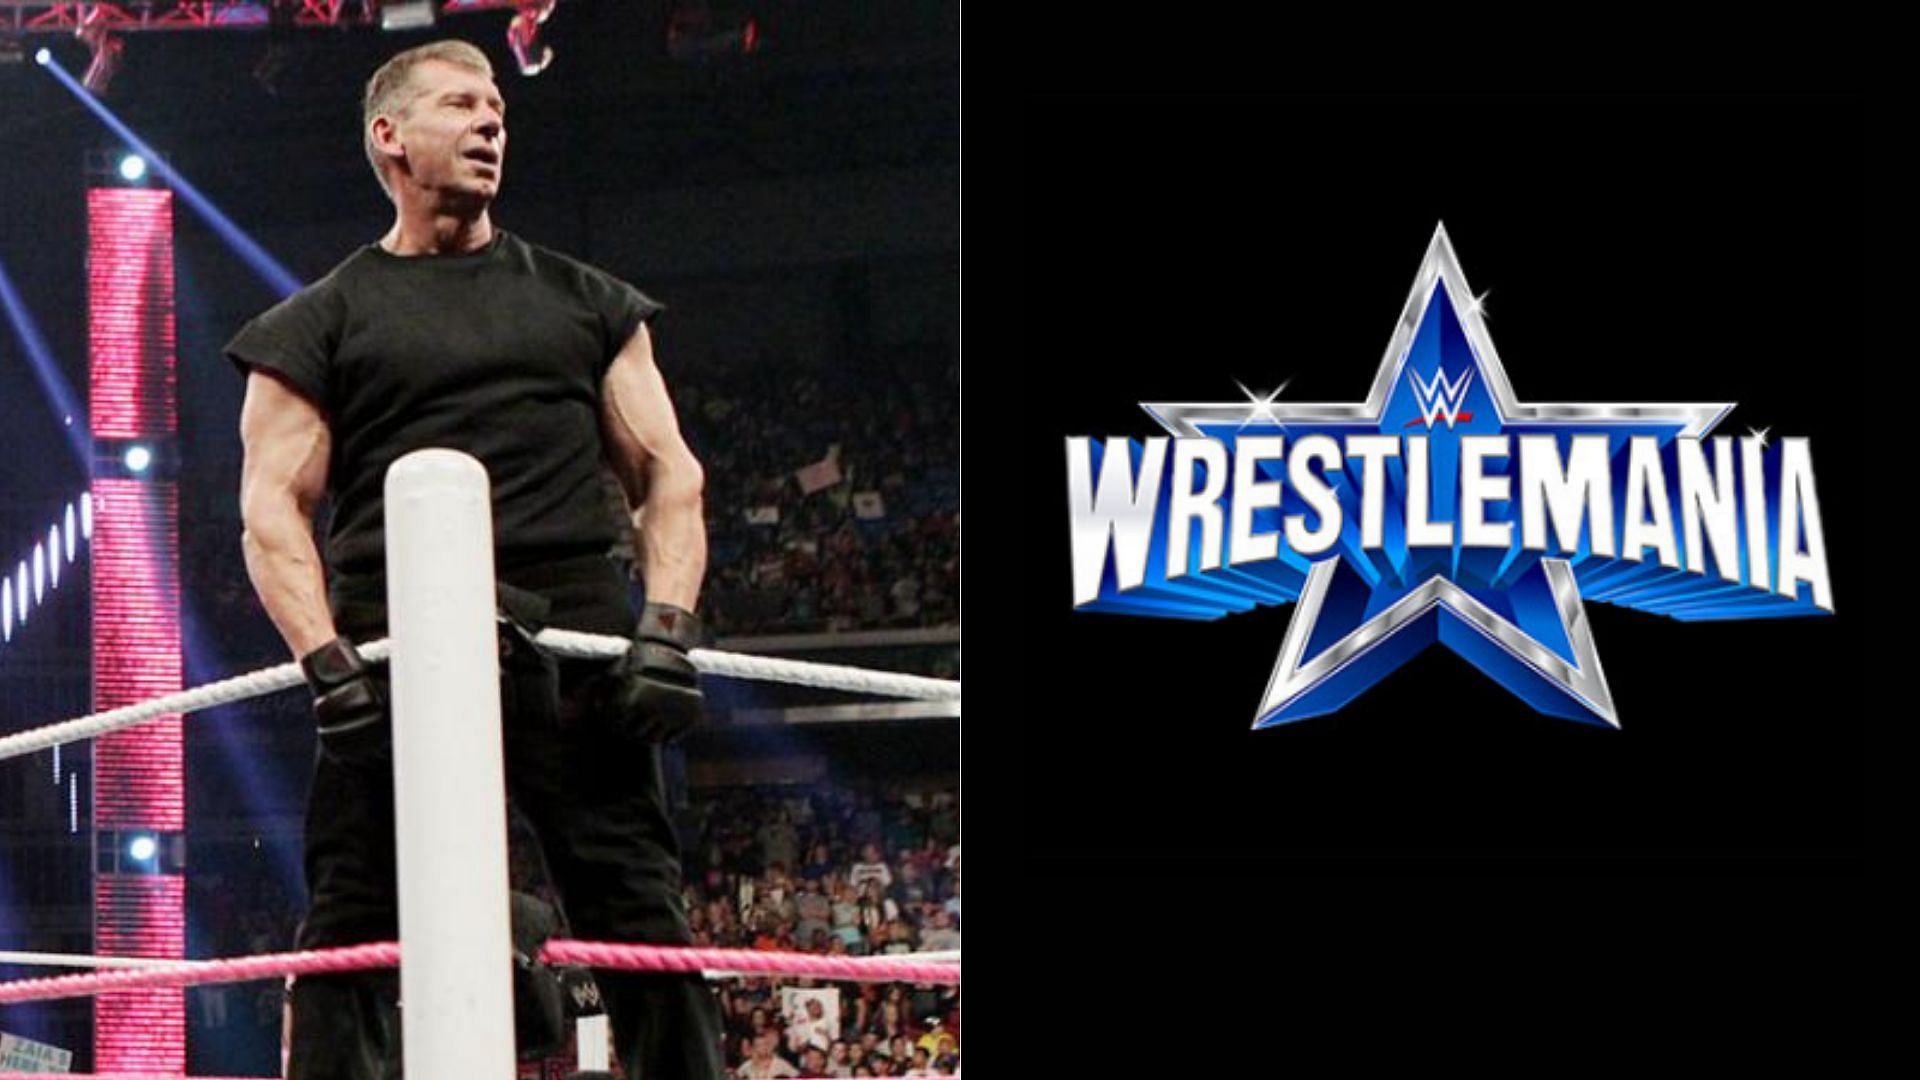 Vince McMahon is not advertised to appear in a WrestleMania 38 match